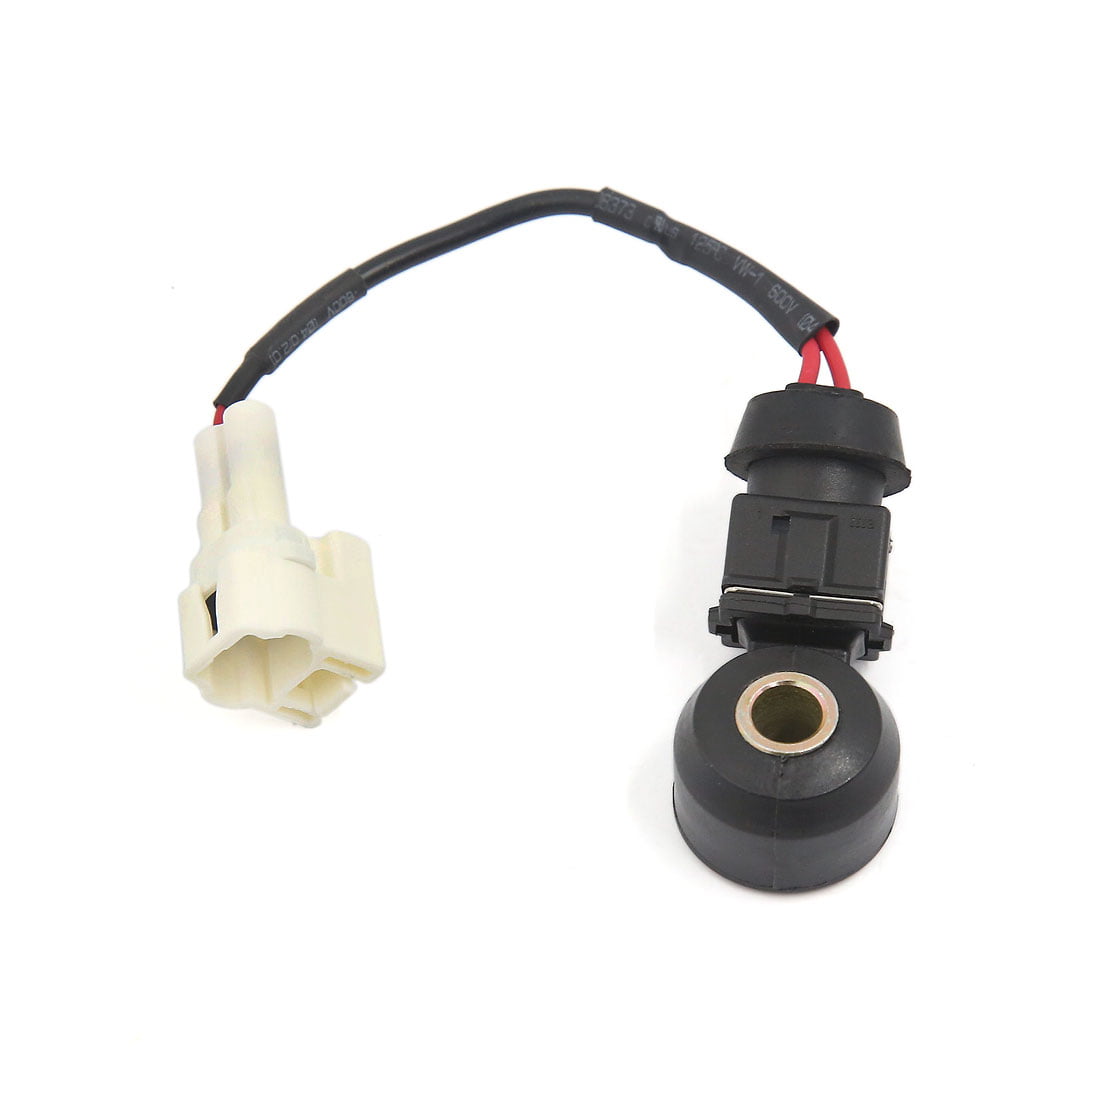 HQRP Knock Sensor w/Wiring Harness for Nissan Frontier 98 99 00 1998 1999 2000 ; Nissan NX 91 92 93 1991 1992 1993 plus HQRP Coaster 